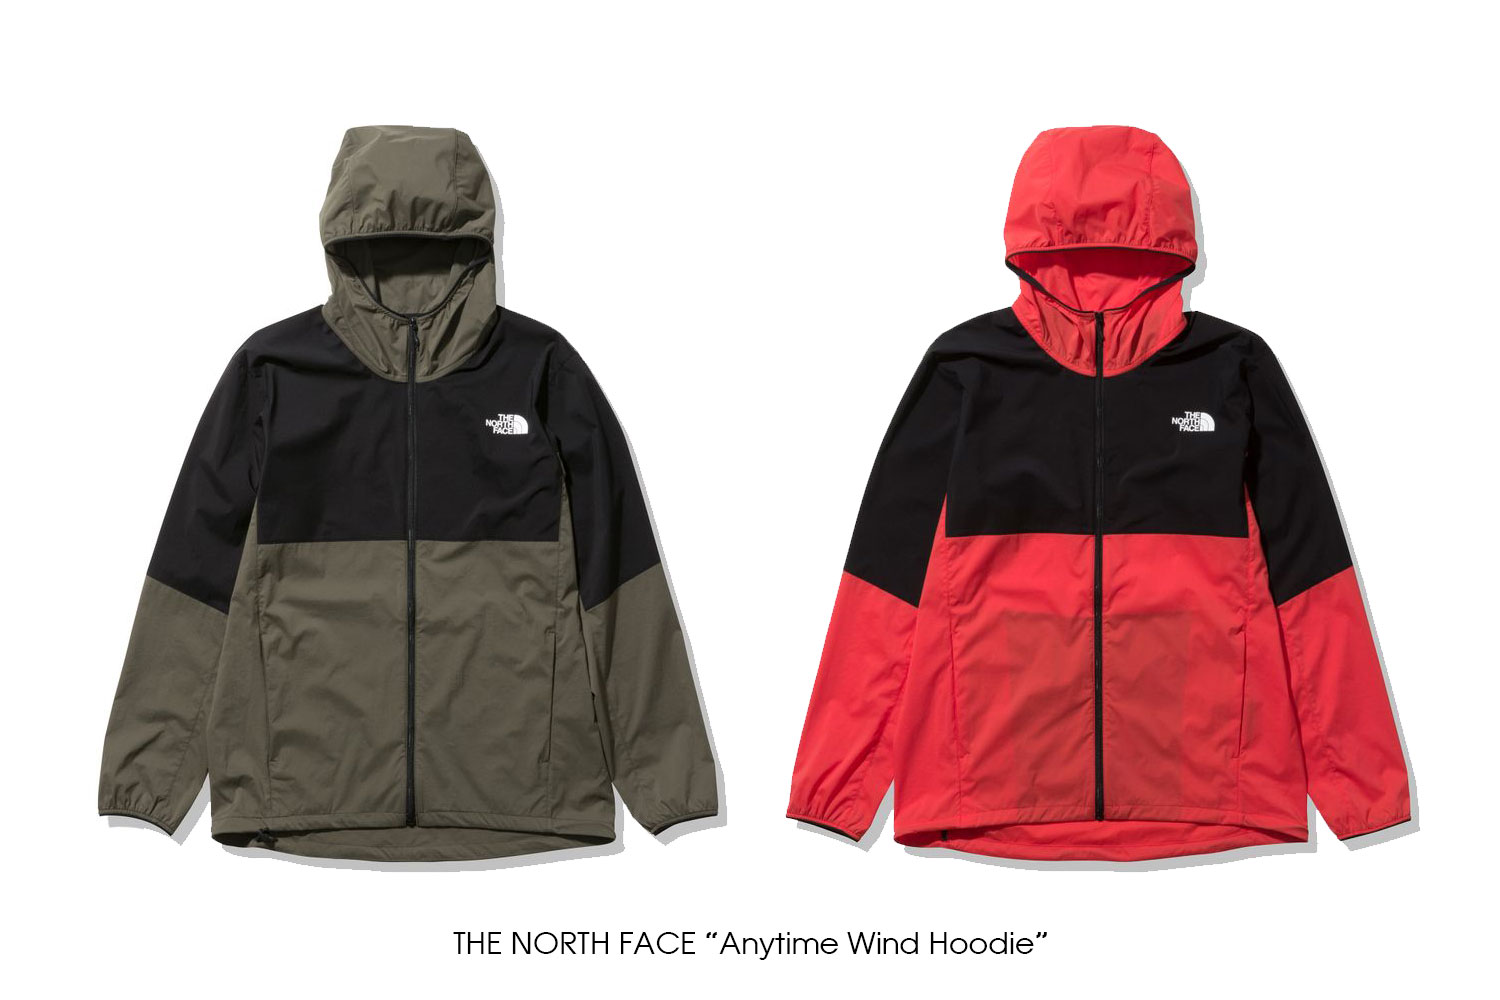 THE NORTH FACE "Anytime Wind Hoodie"